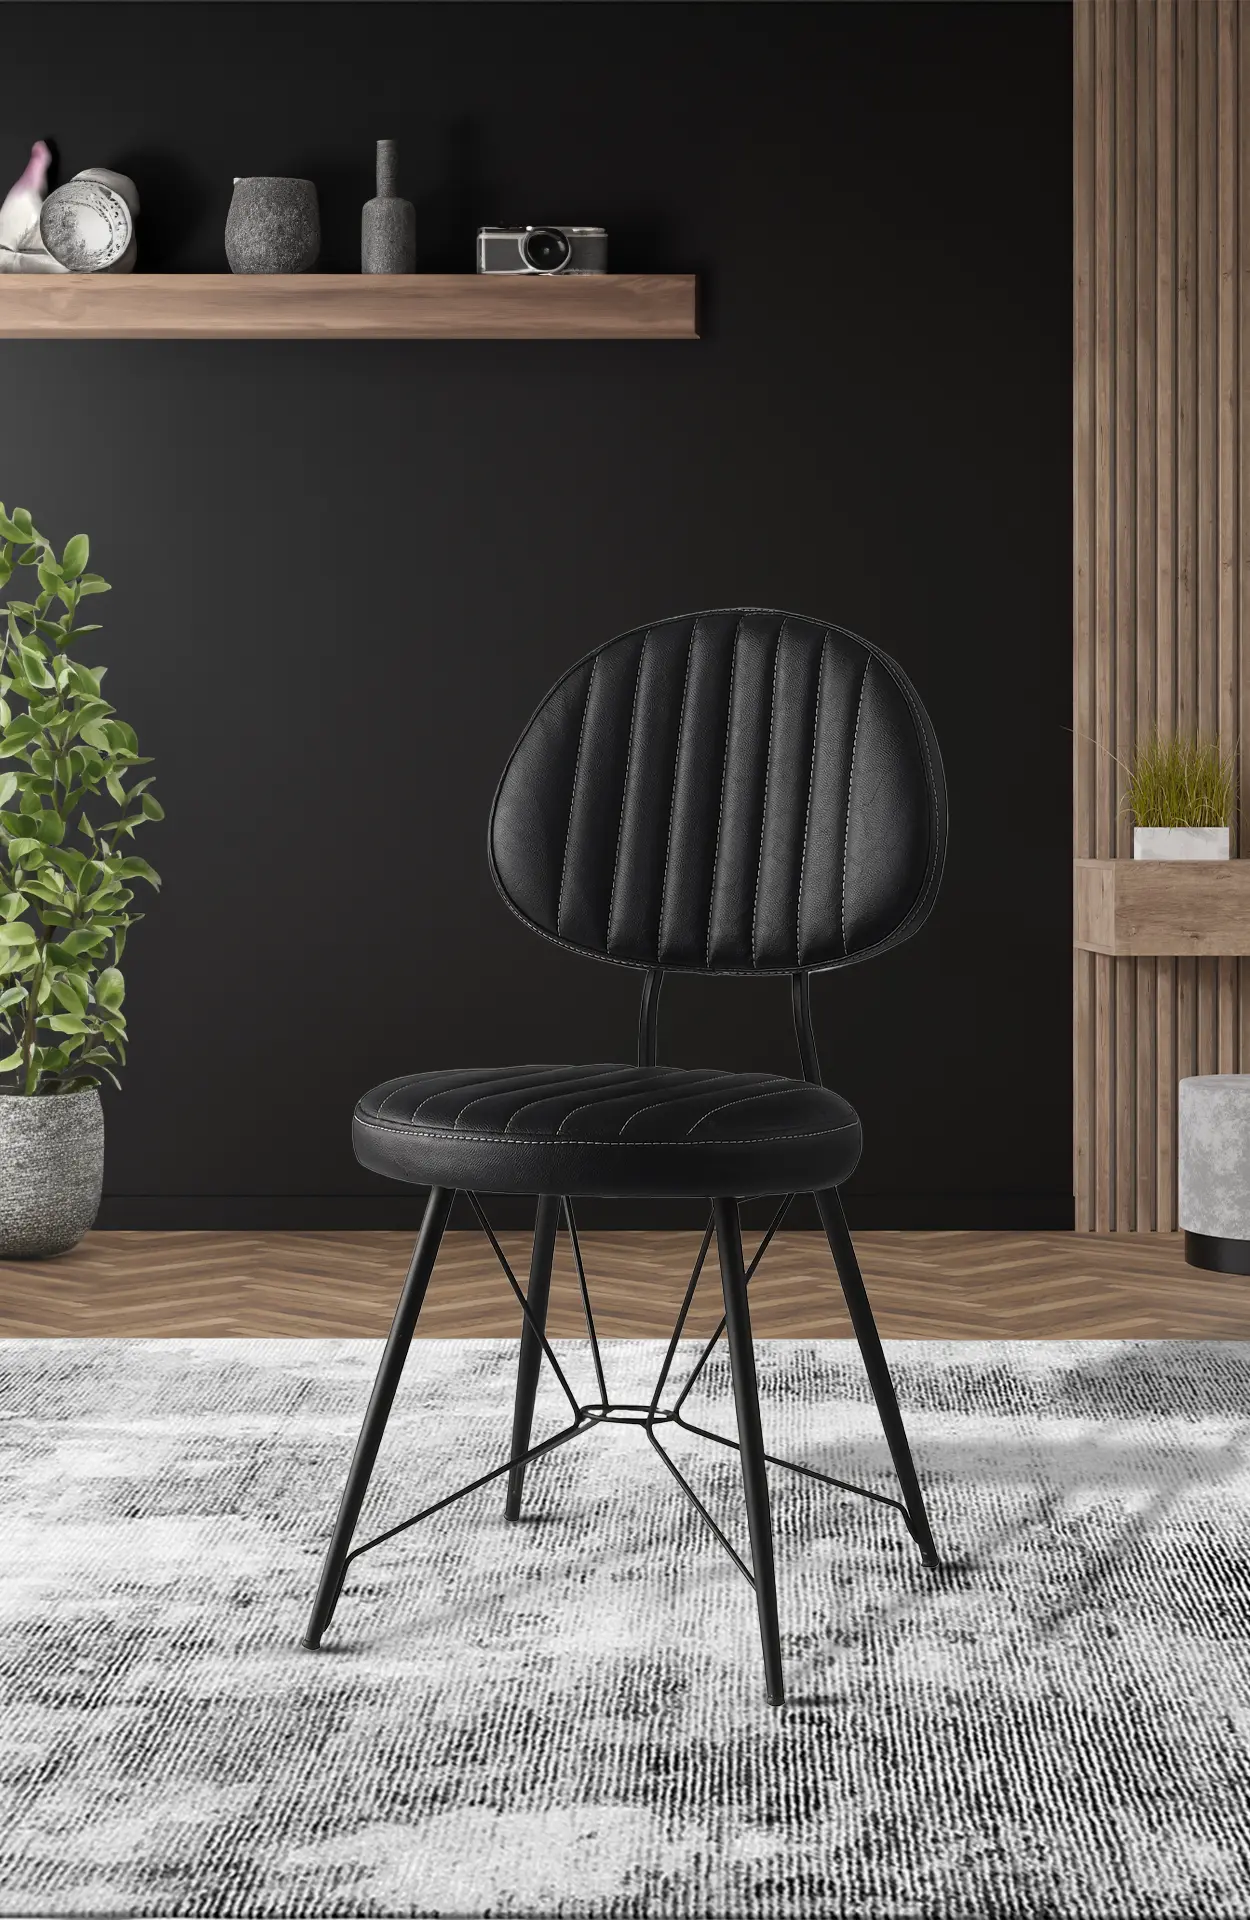 Amos Metal Chair Leather Sitting Modern Design Dining Room